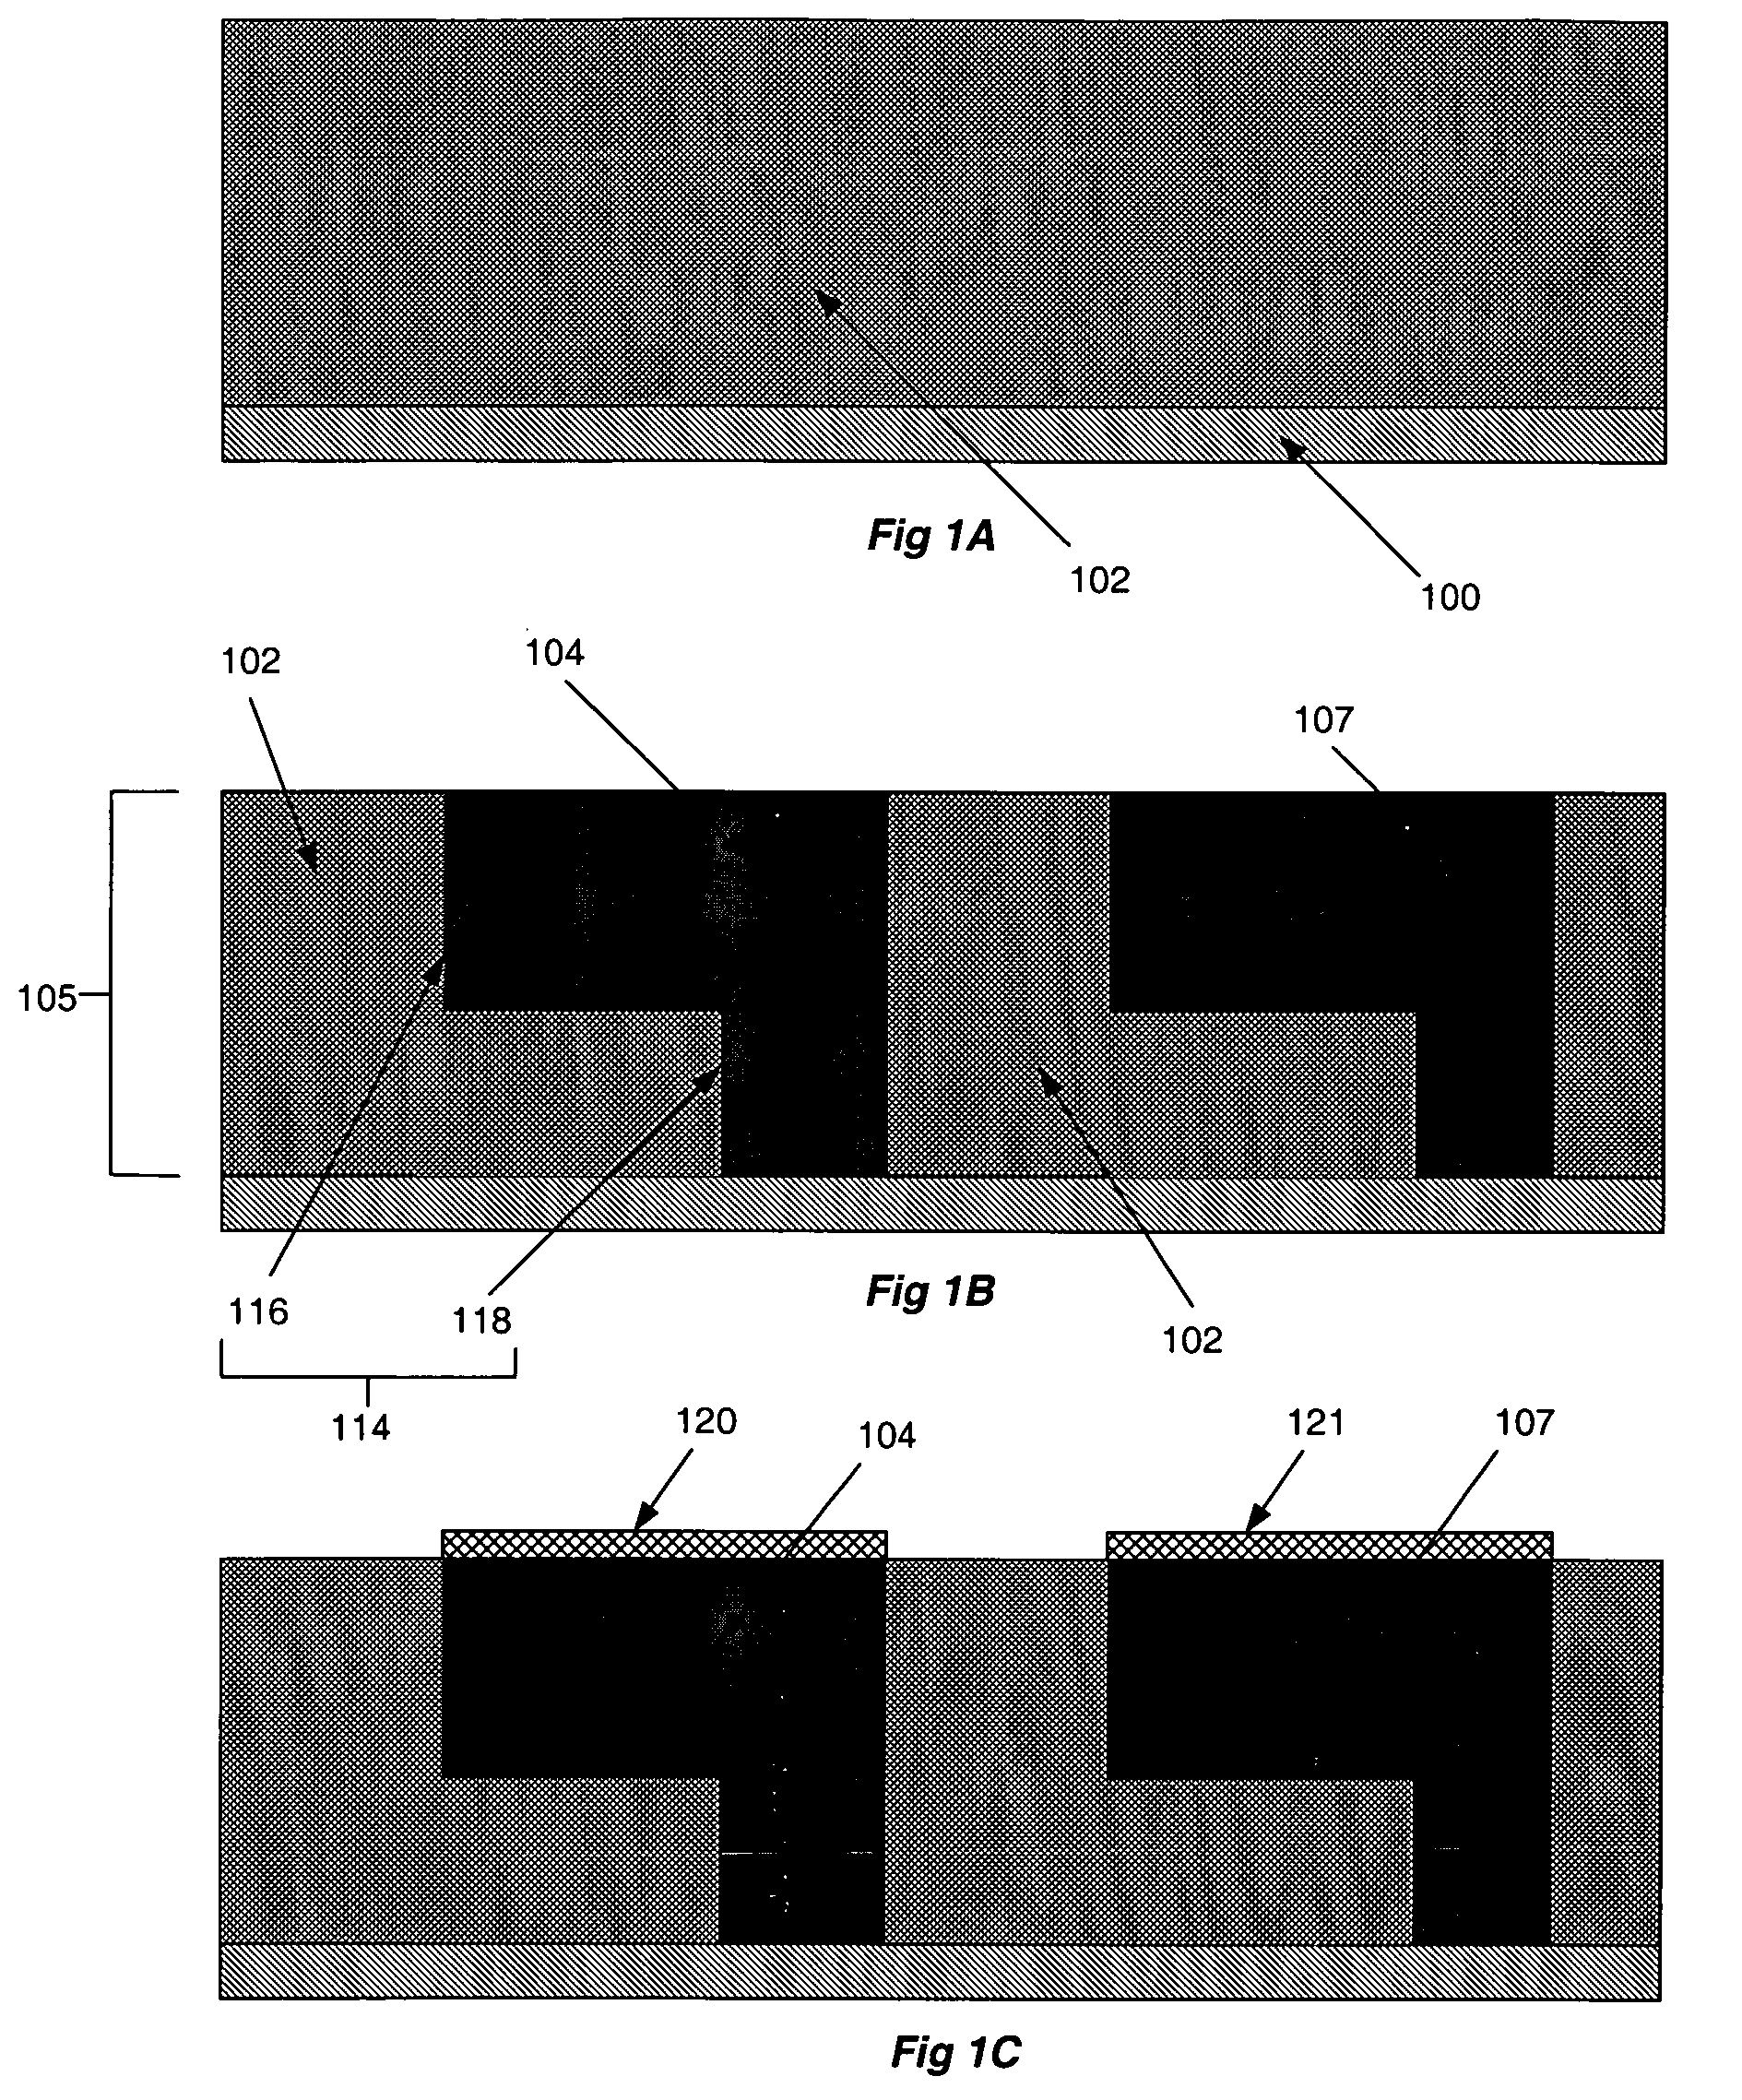 Method of forming a selectively converted inter-layer dielectric using a porogen material